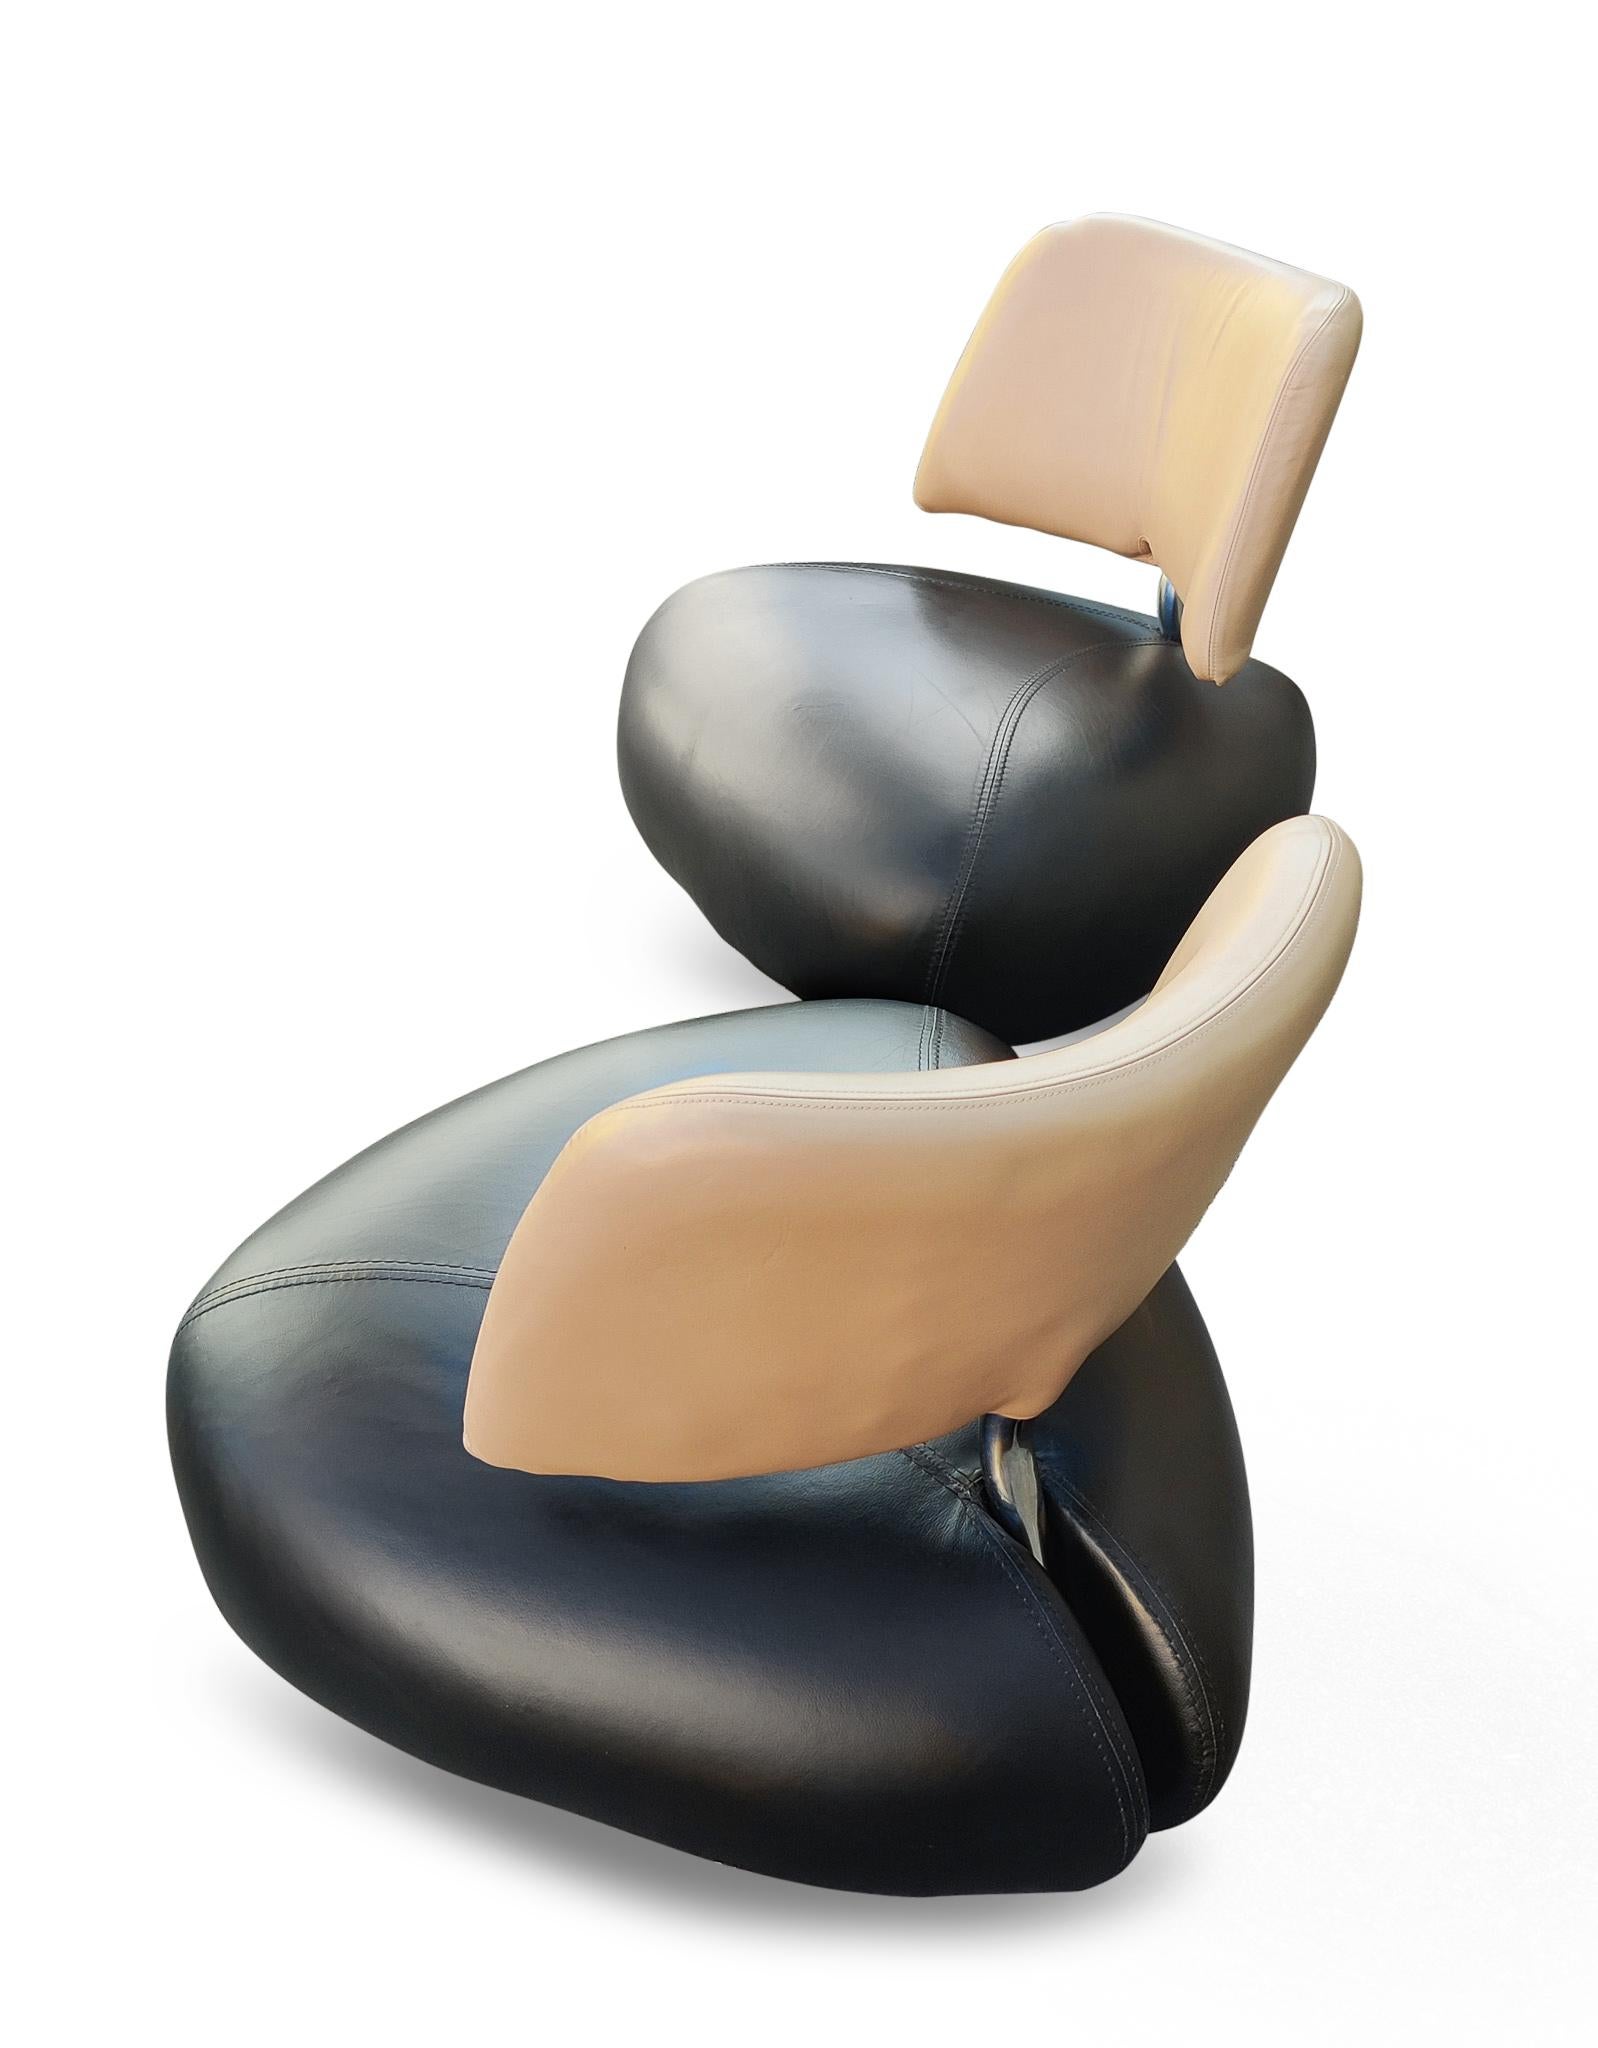 Steel Pallone Leather Lounge Chairs Pair, by Roy de Scheemaker for Leolux, Post-Modern